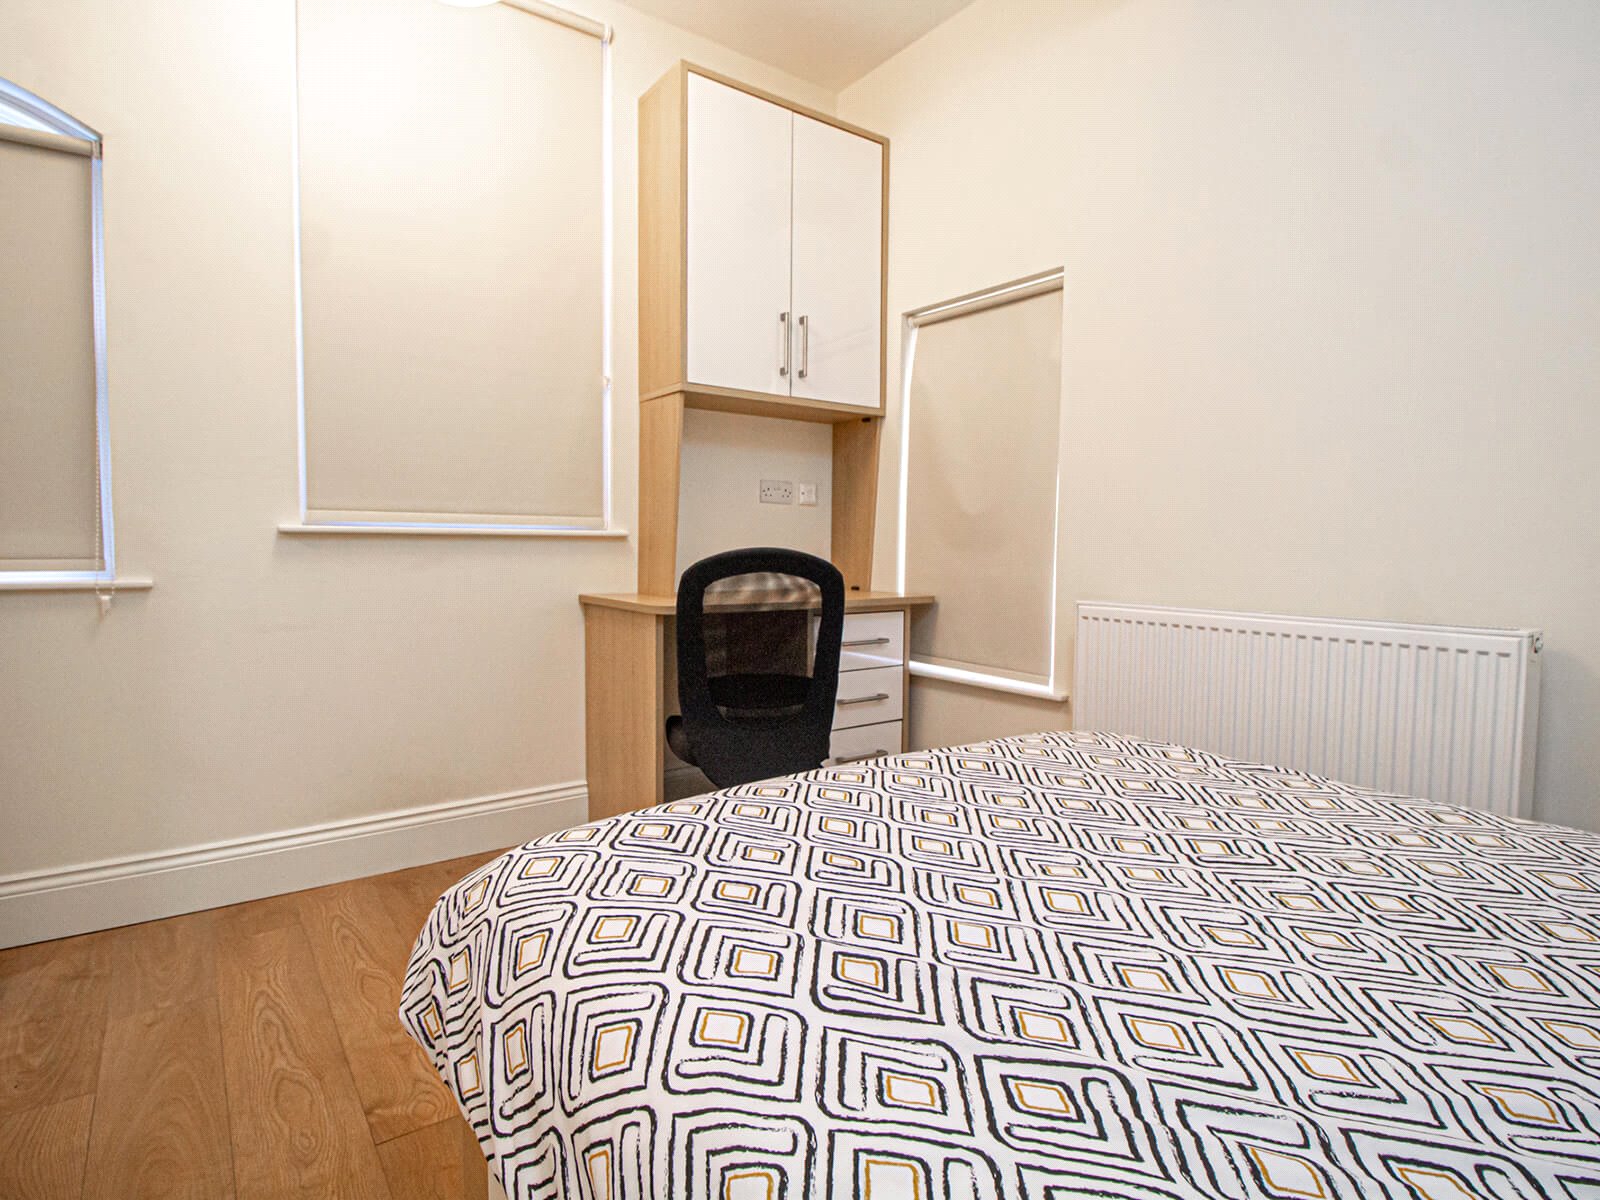 2 bed apartment for rent in Leeds. From YPP - Leeds